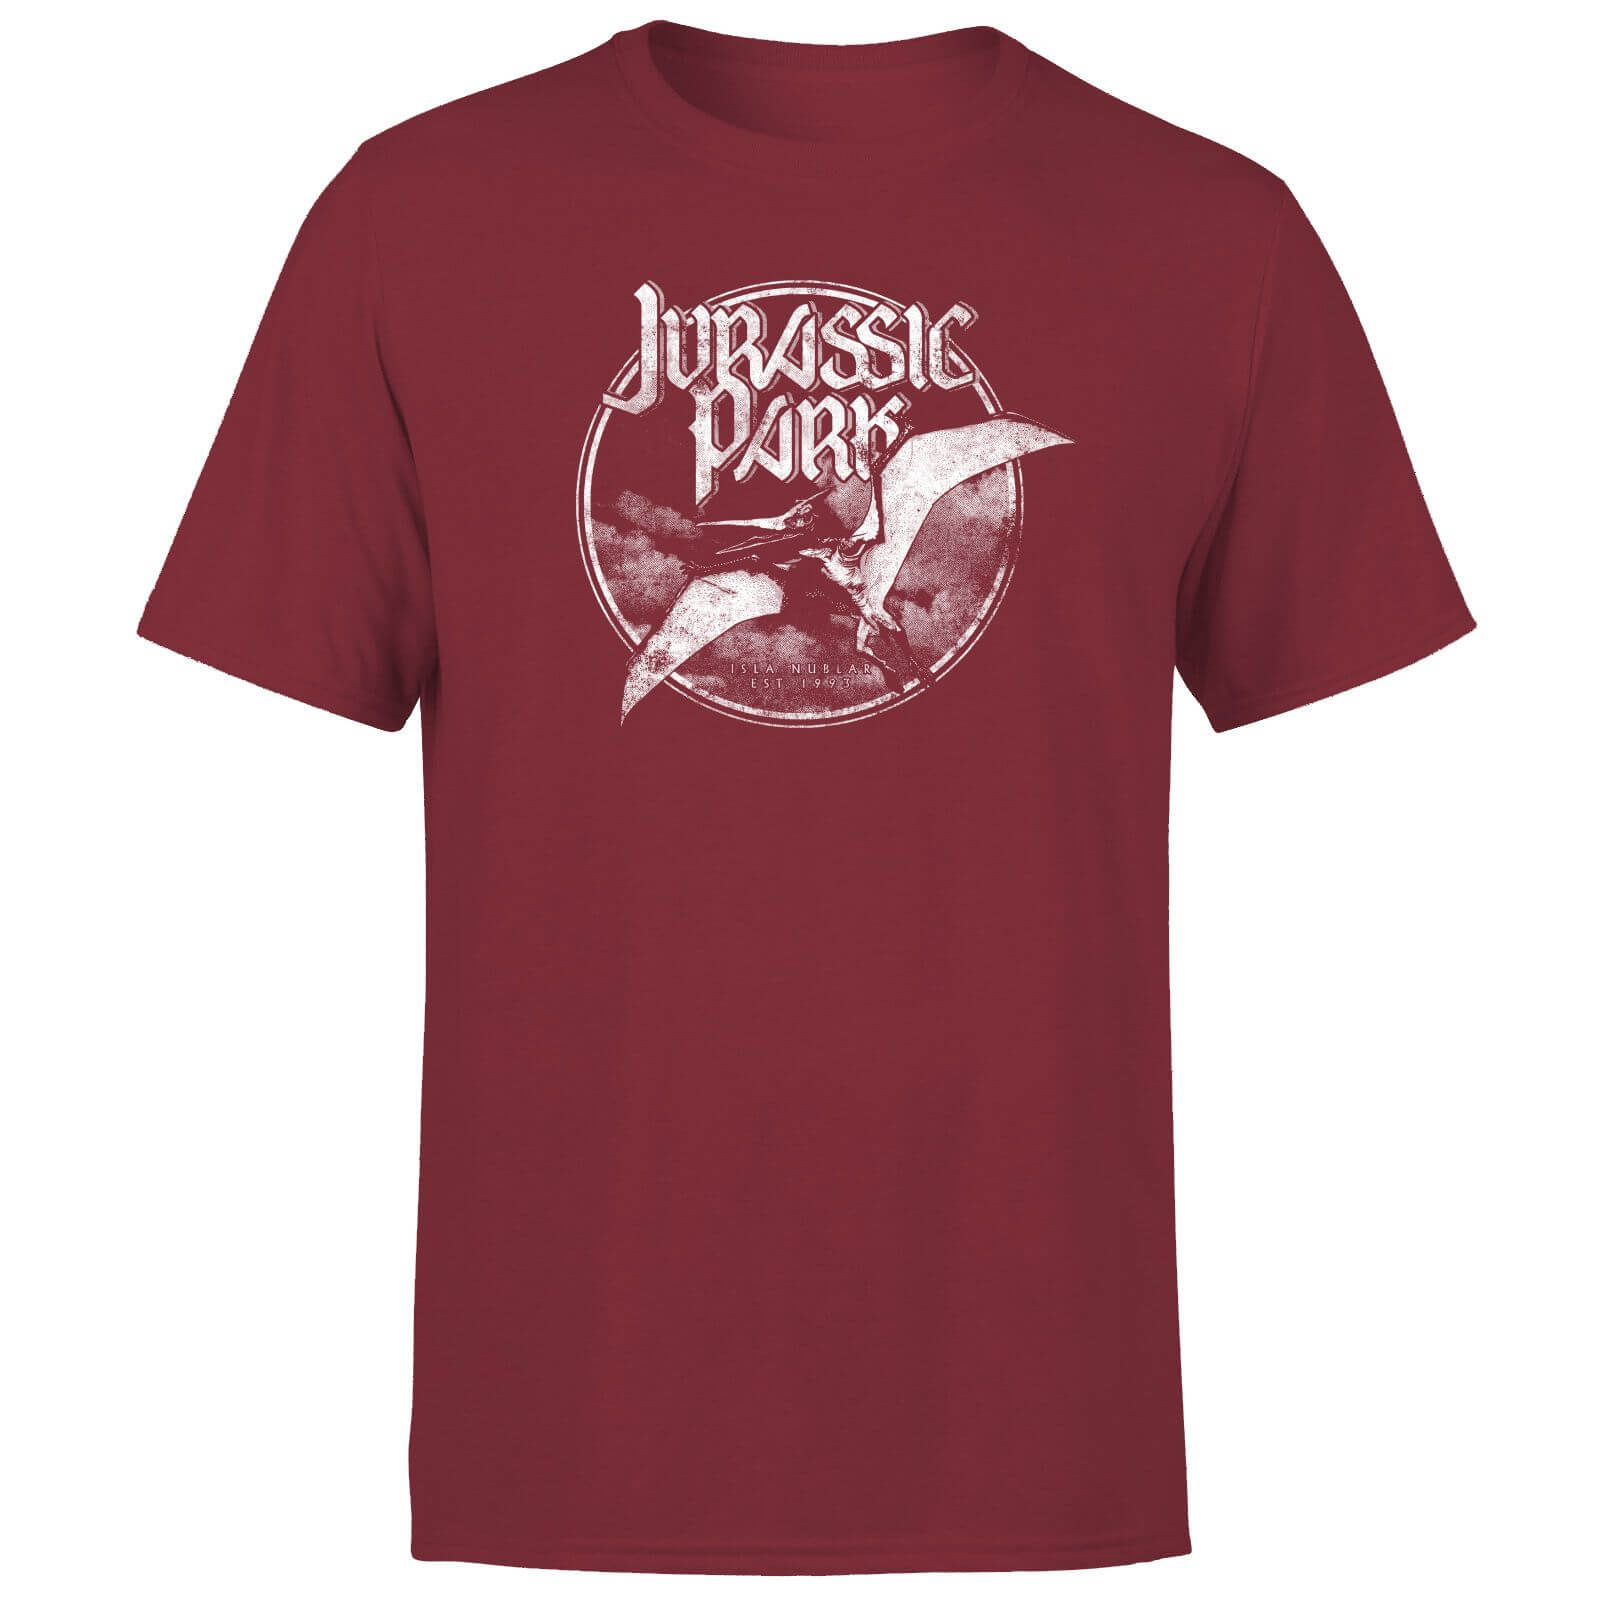 View the best prices for: jurassic park flying threat mens t-shirt